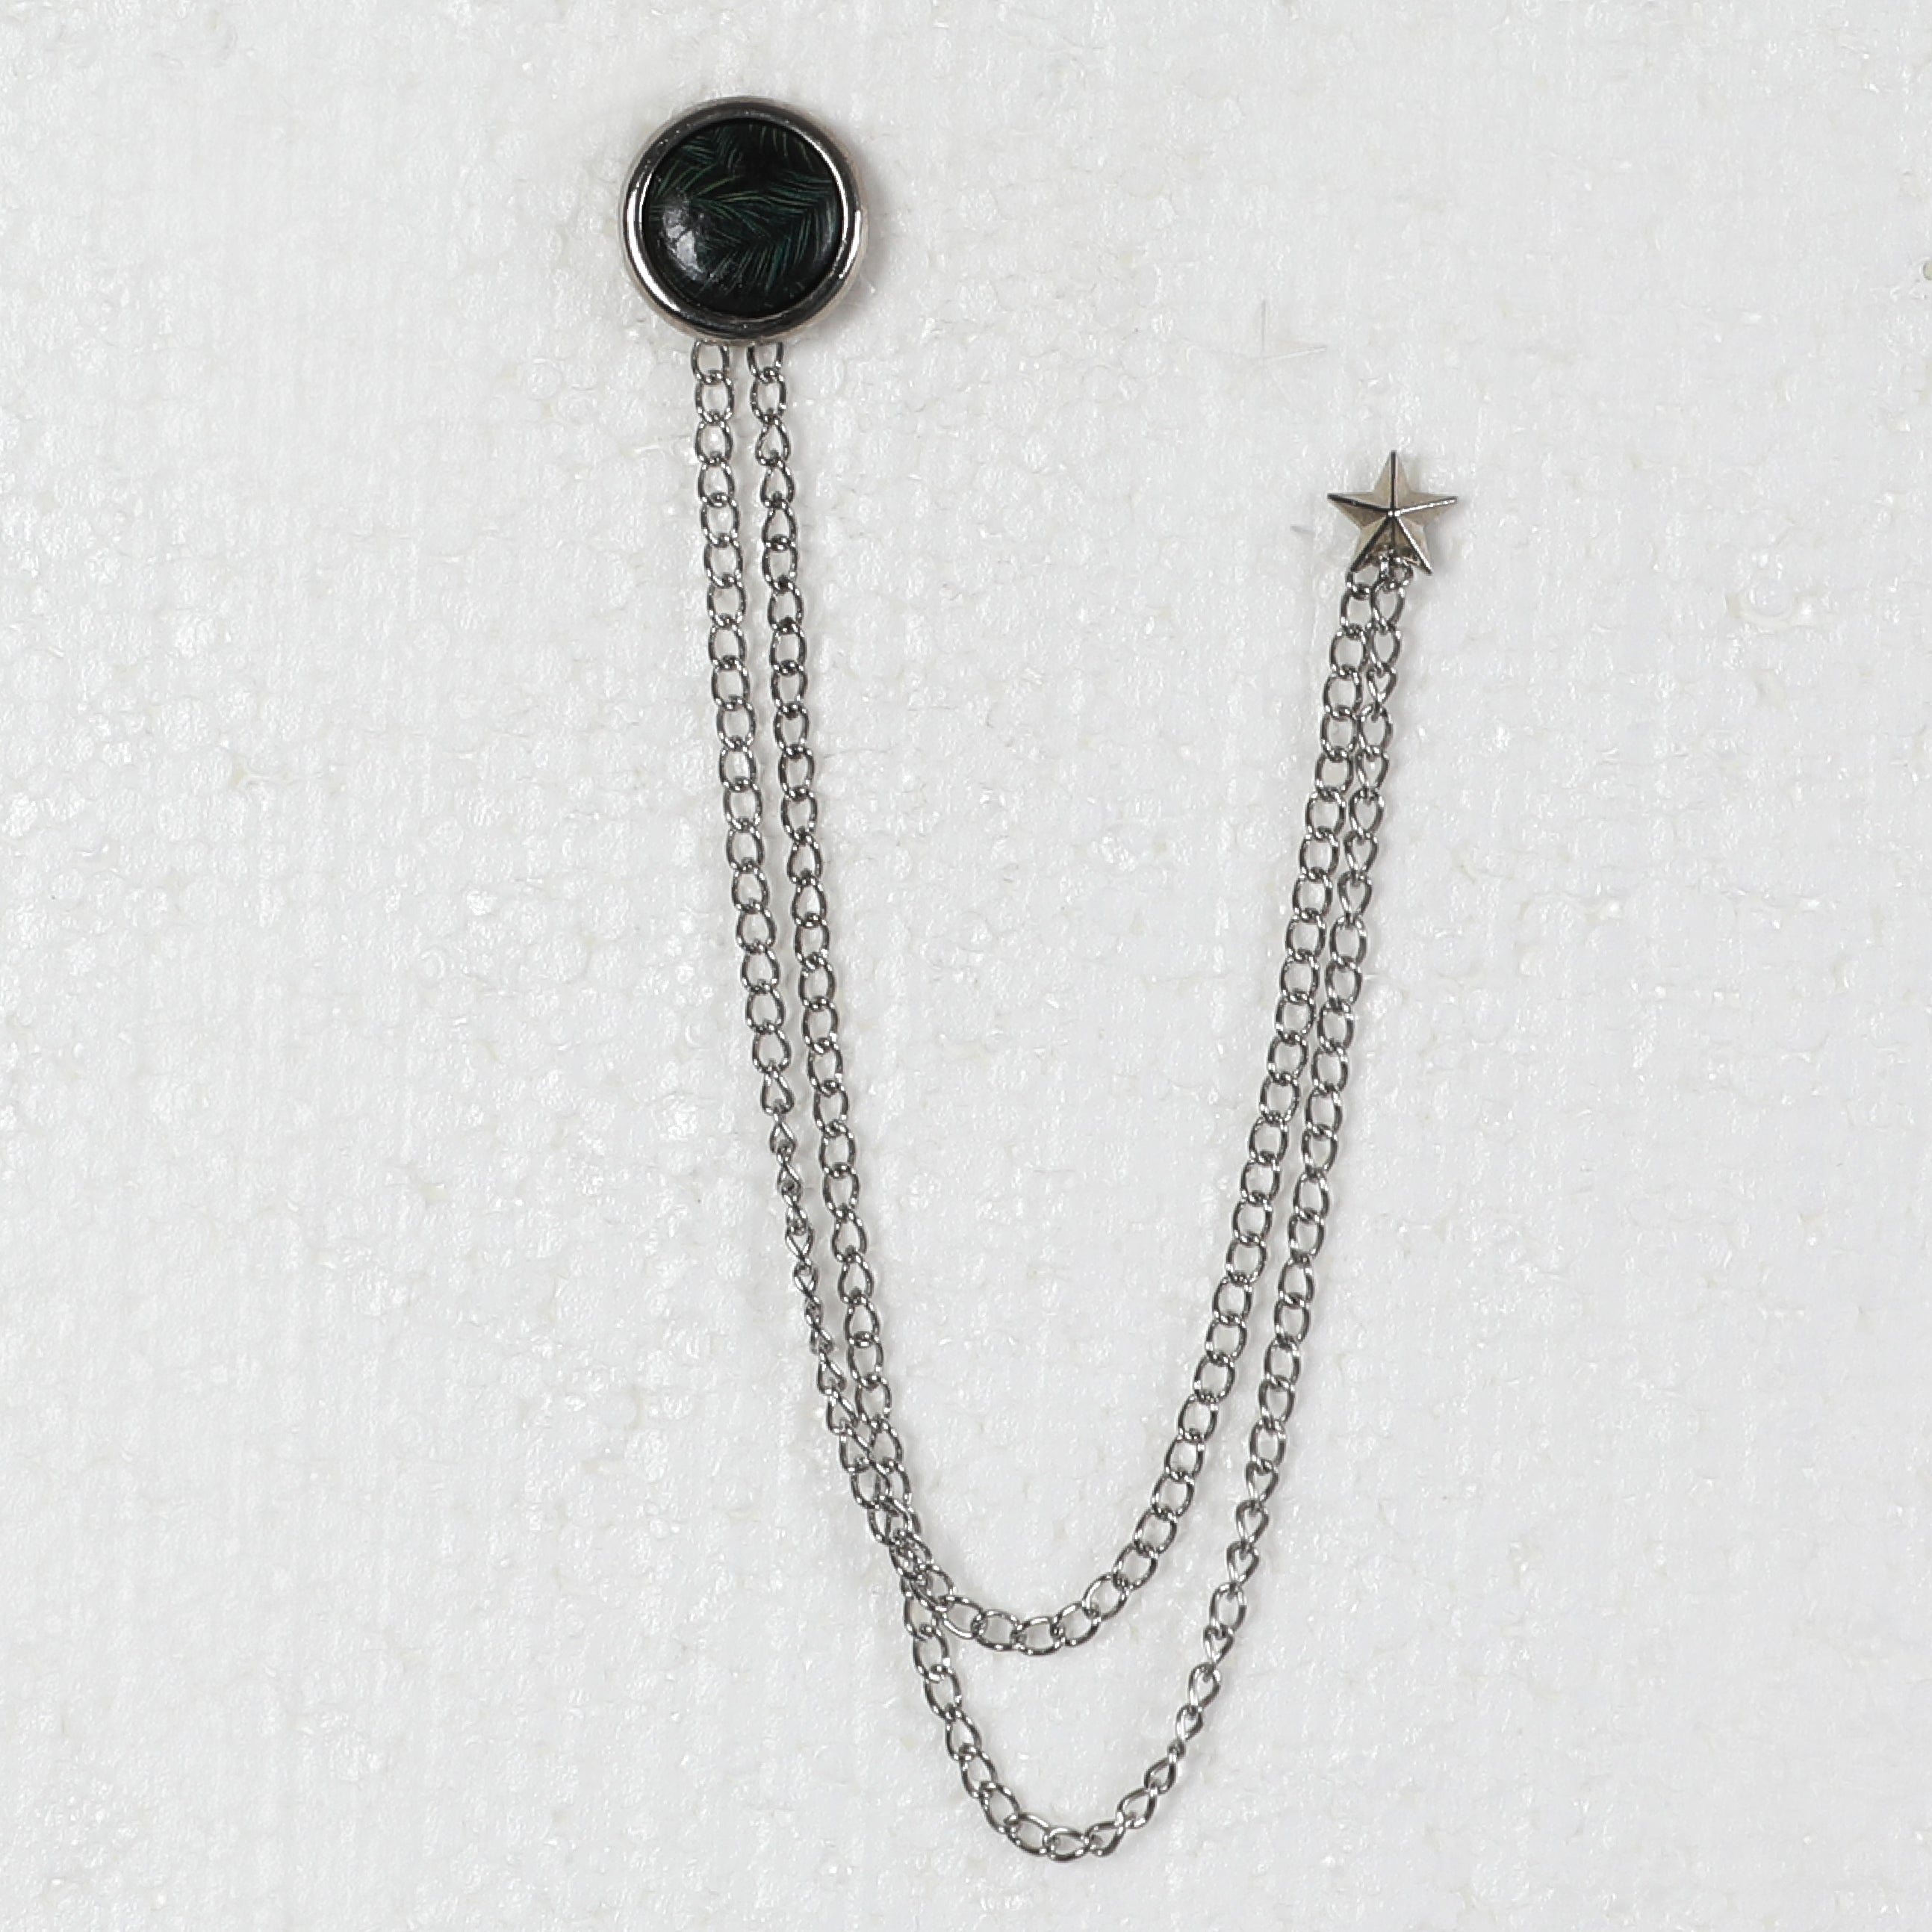 Men Silver Chained Pin With Circled Ornamented Black Design 